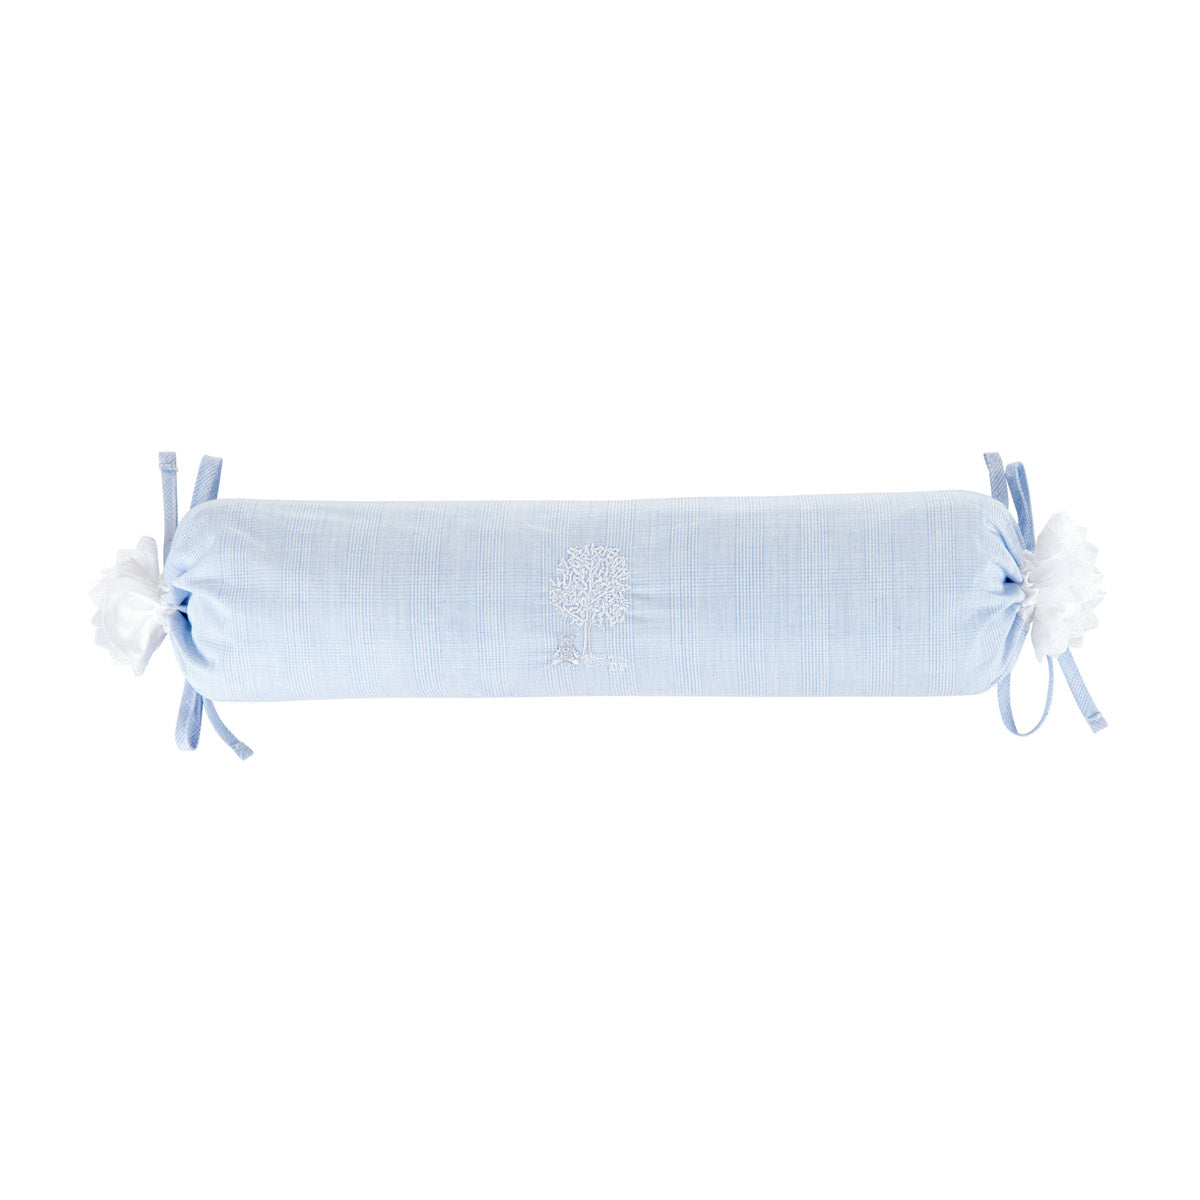 Theophile & Patachou Baby Roll Cushion - Sweet Blue